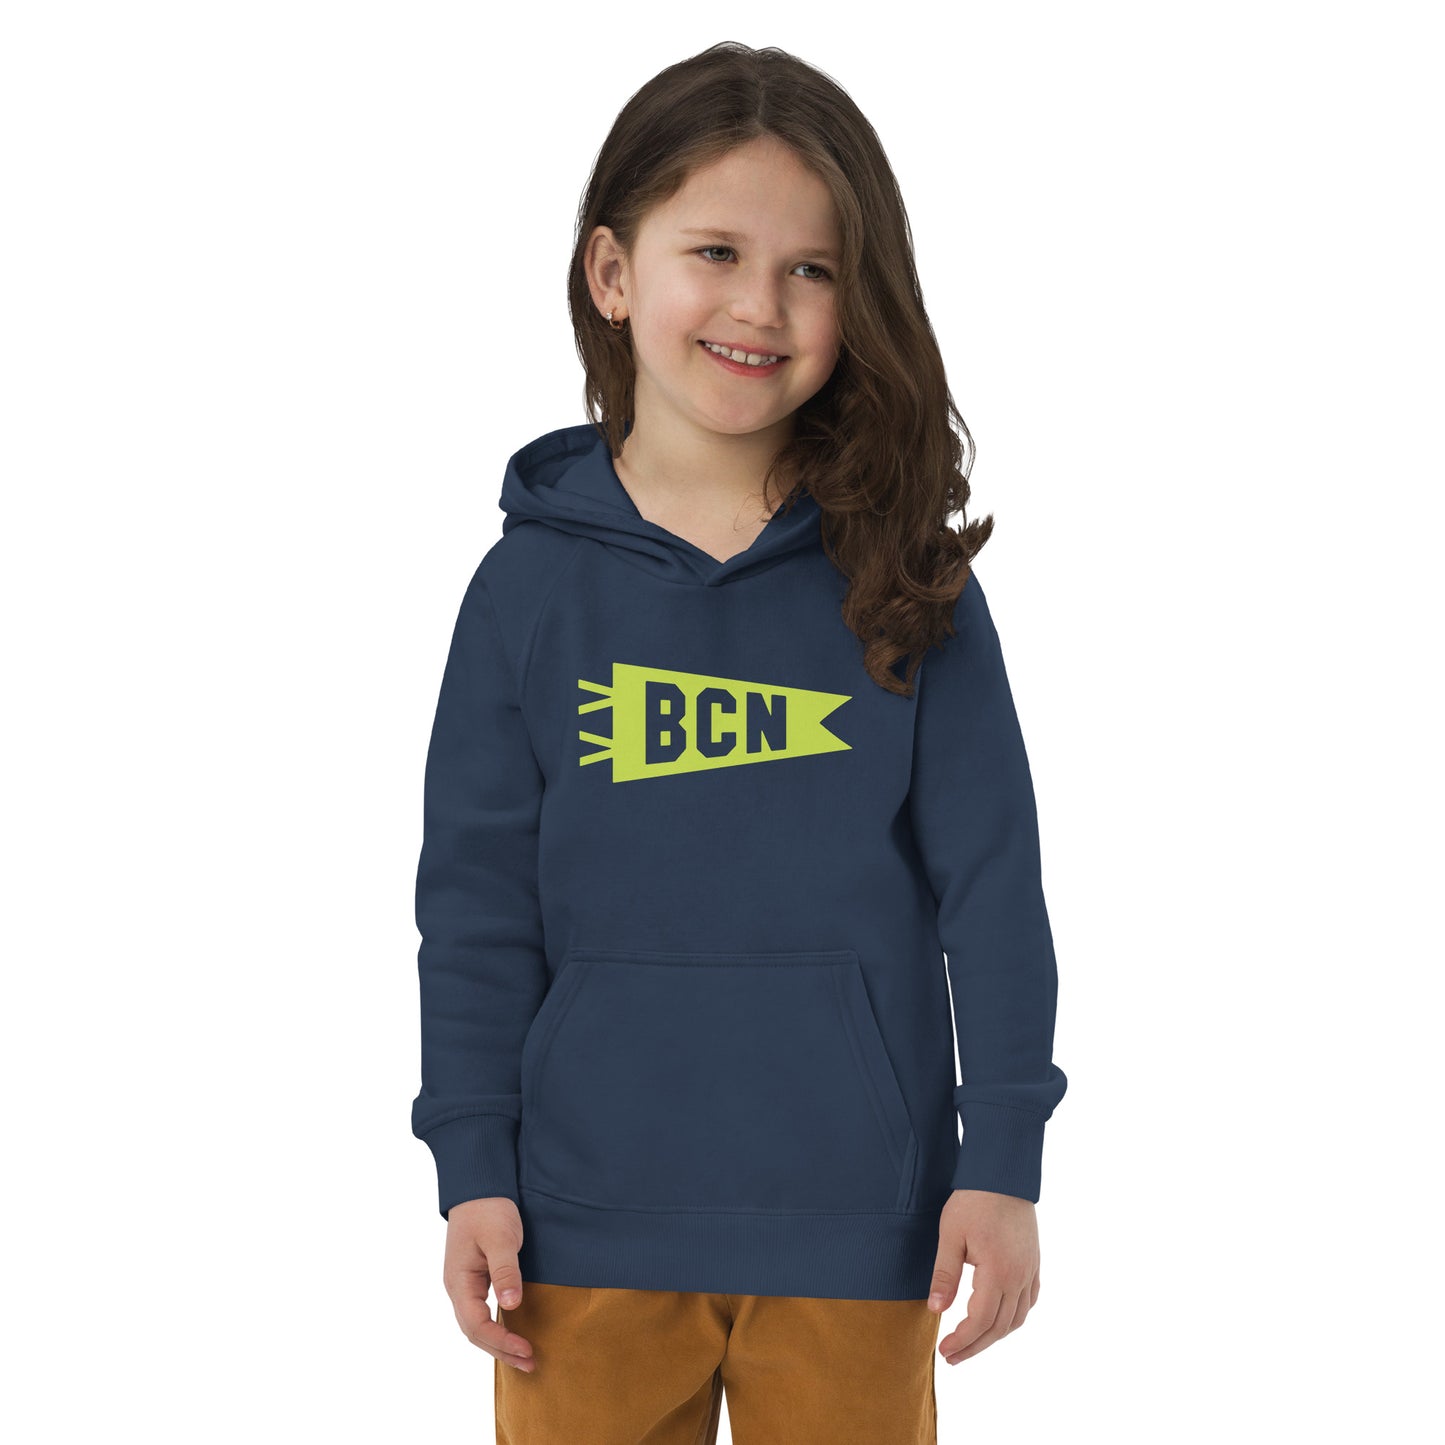 Kid's Sustainable Hoodie - Green Graphic • BCN Barcelona • YHM Designs - Image 07